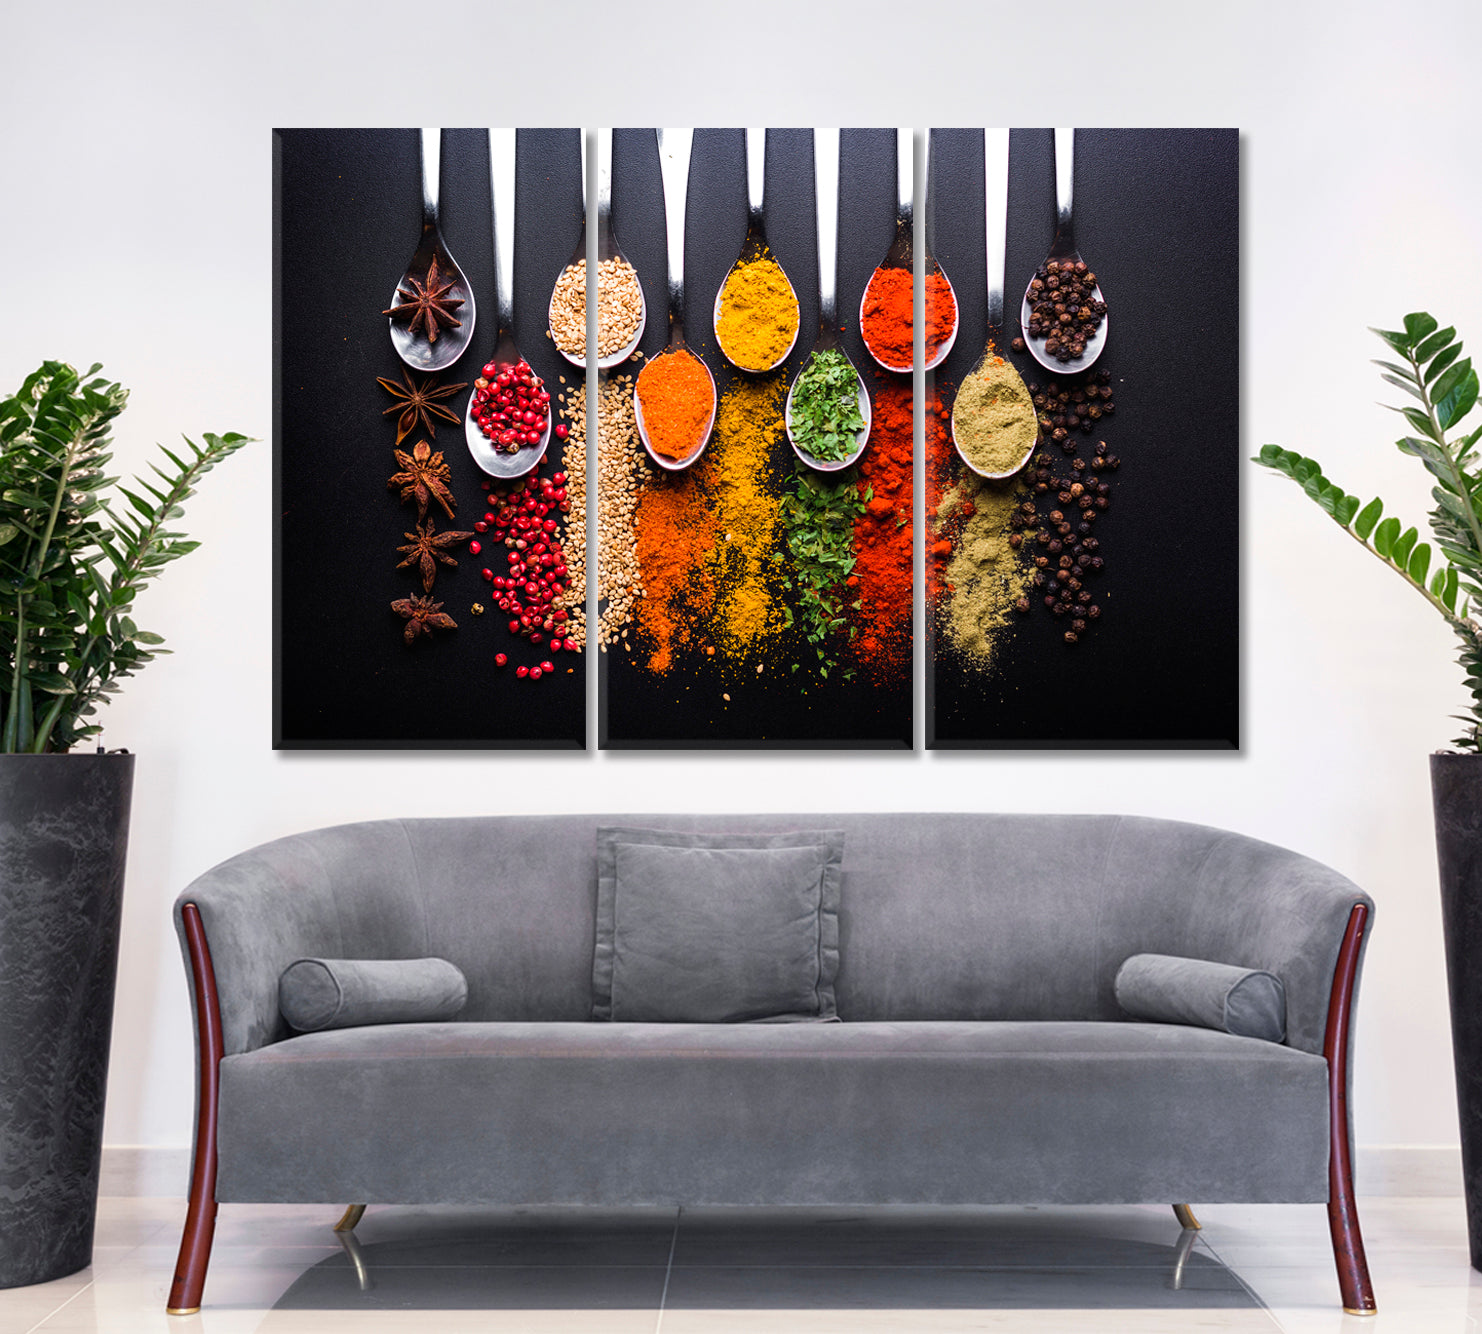 Spices And Condiments Poster Restaurant Modern Wall Art Artesty 3 panels 36" x 24" 